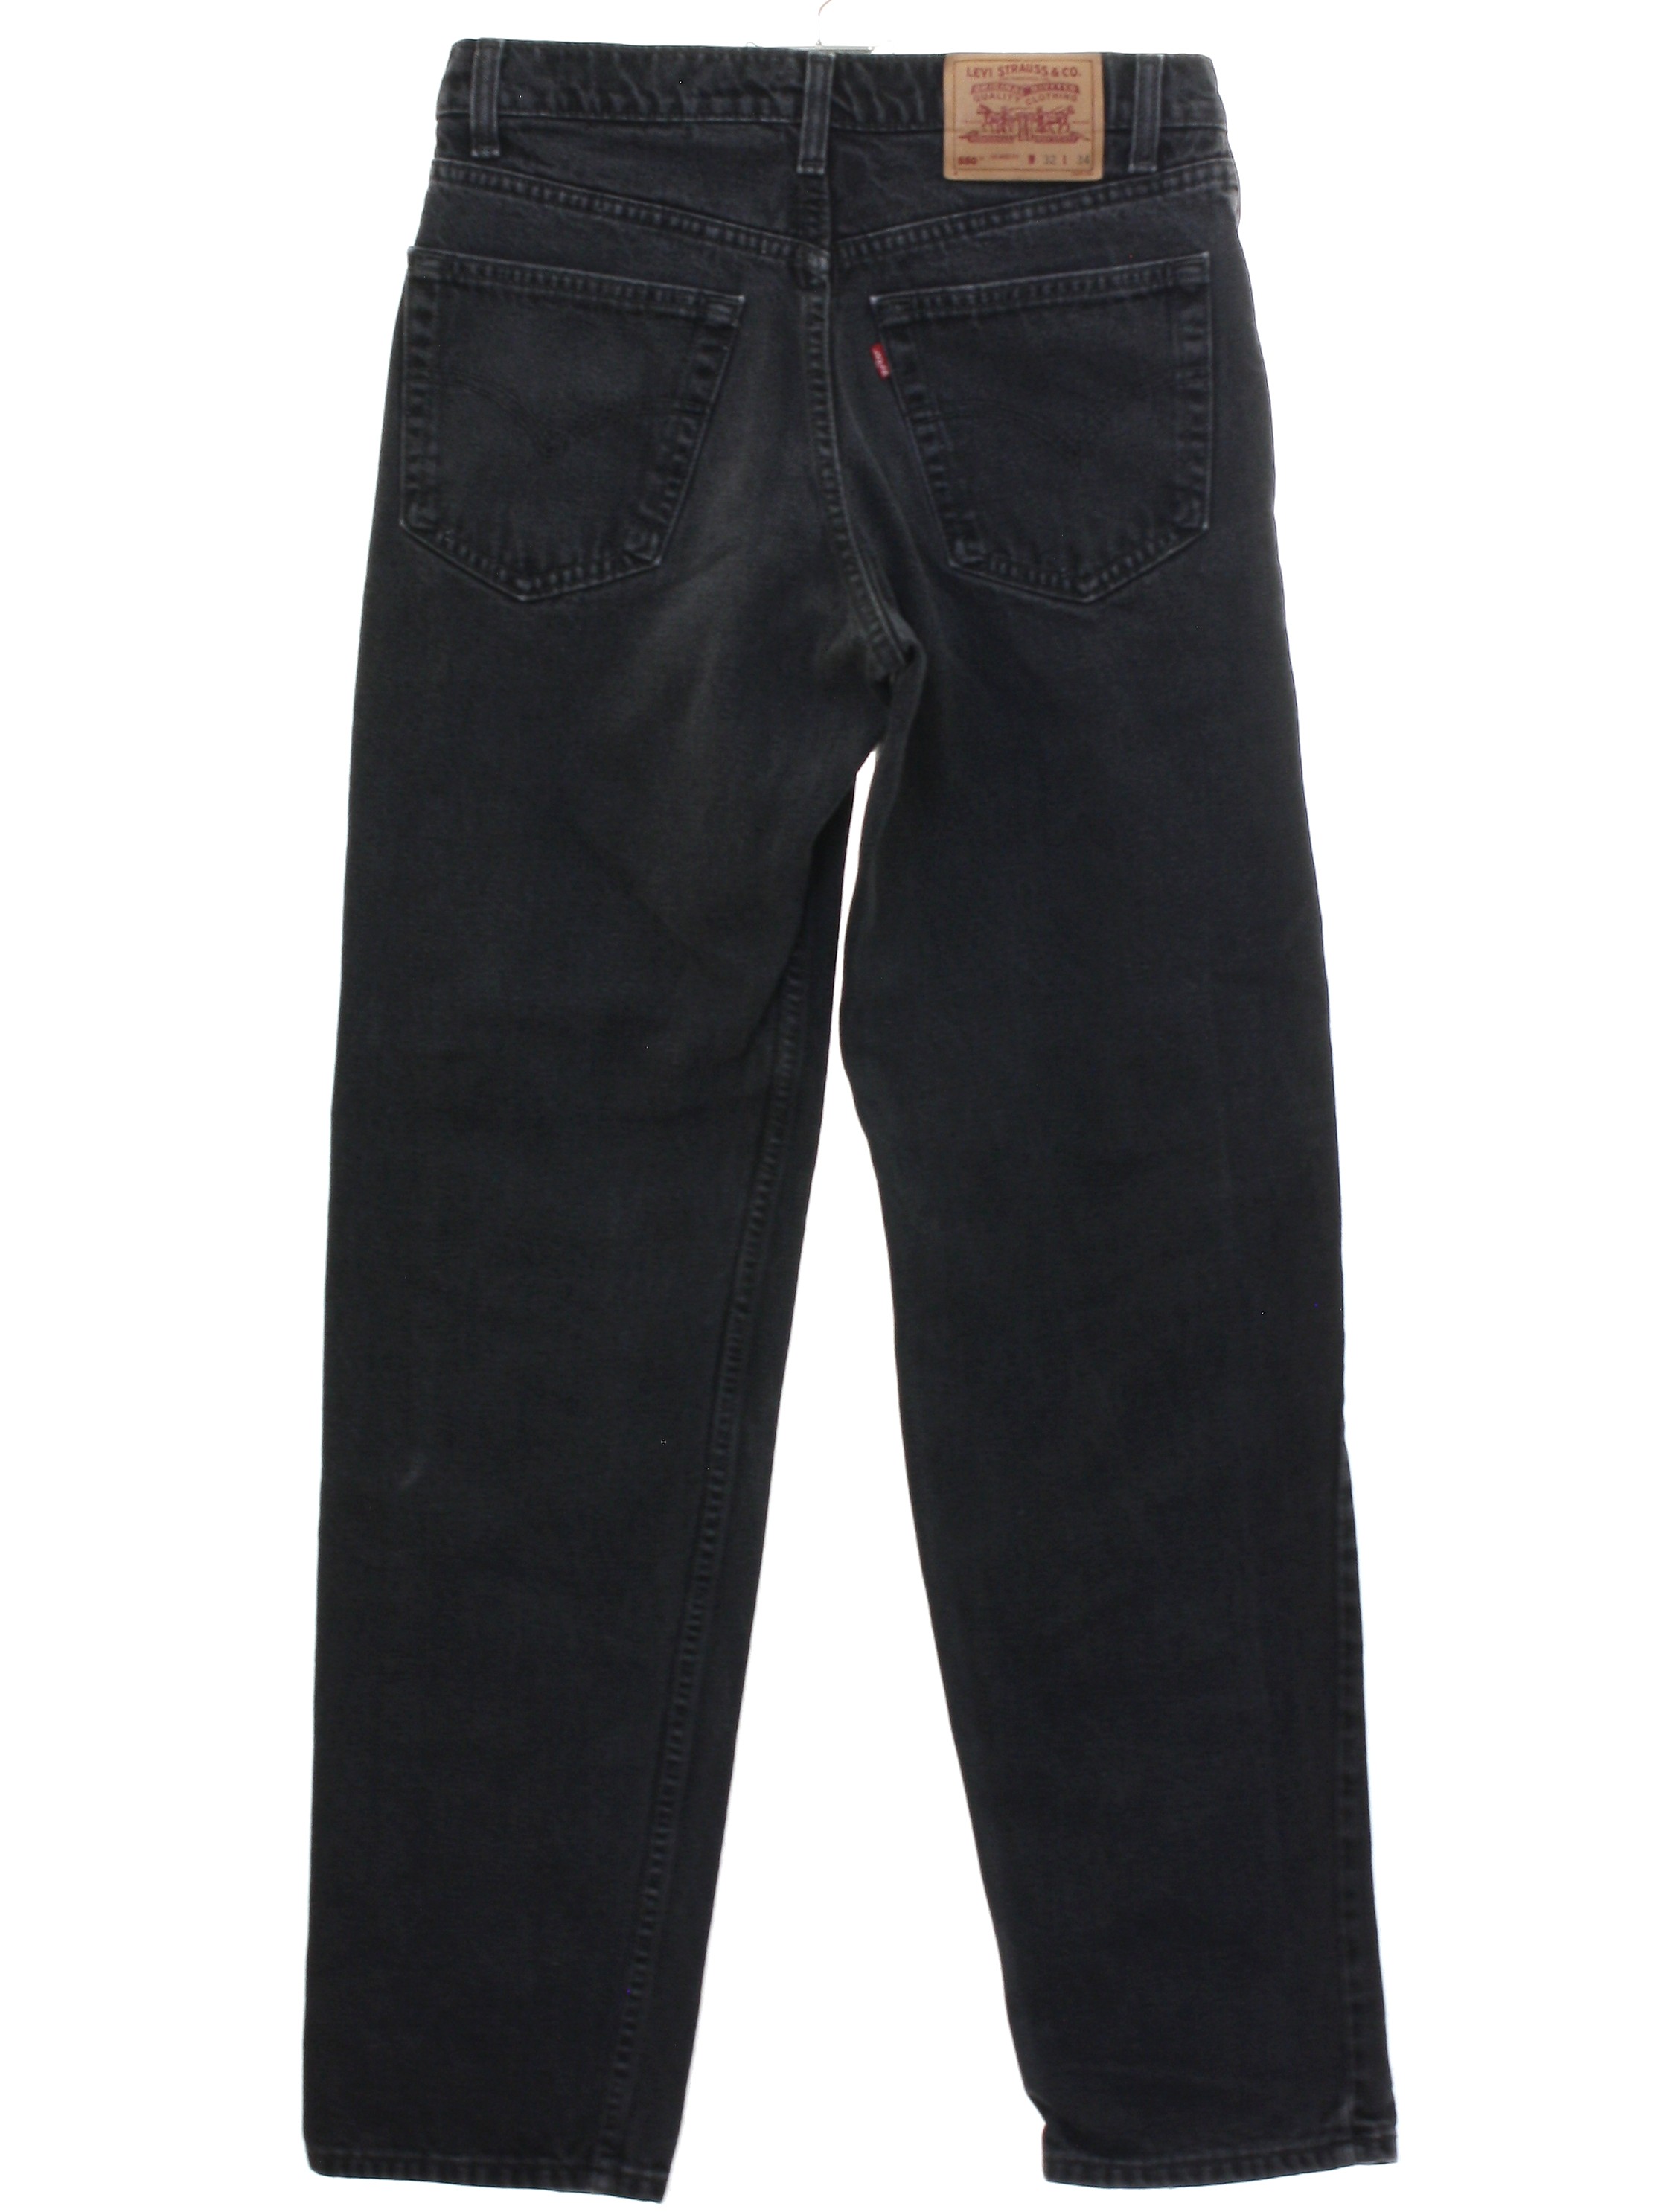 90s Vintage Levis 550 Relaxed Fit Pants: 90s -Levis 550 Relaxed Fit ...